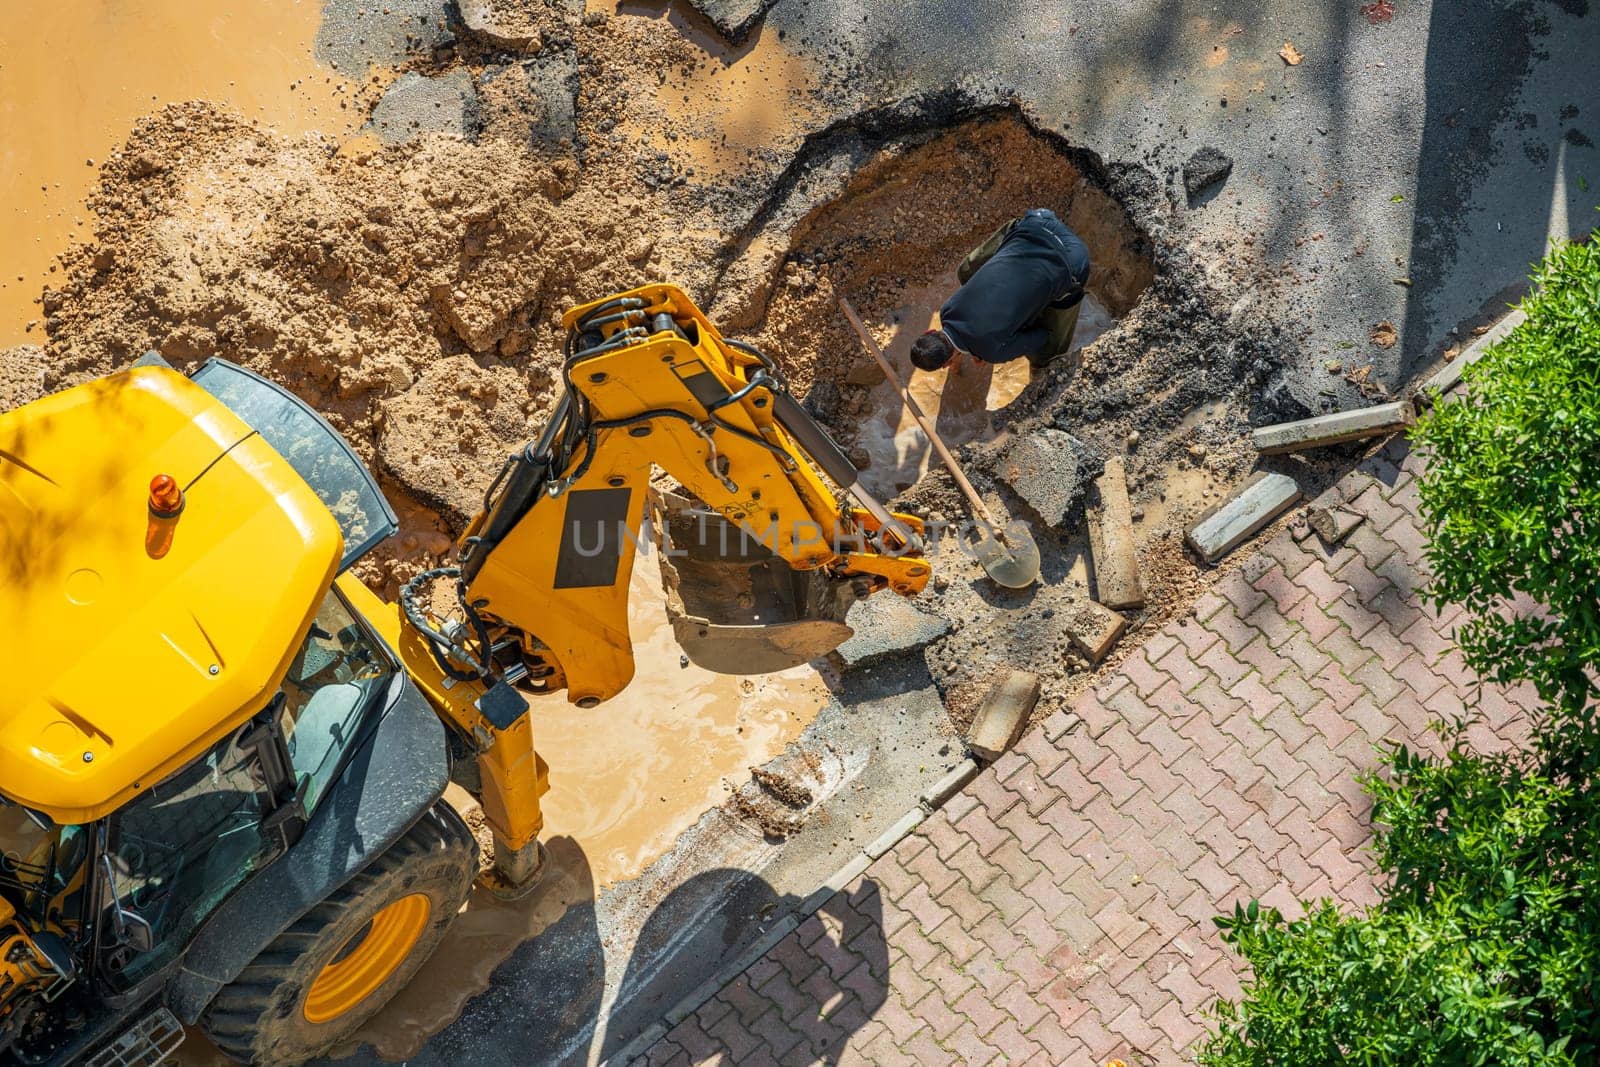 Digger digging asphalt to repair a water fault in a street by Sonat